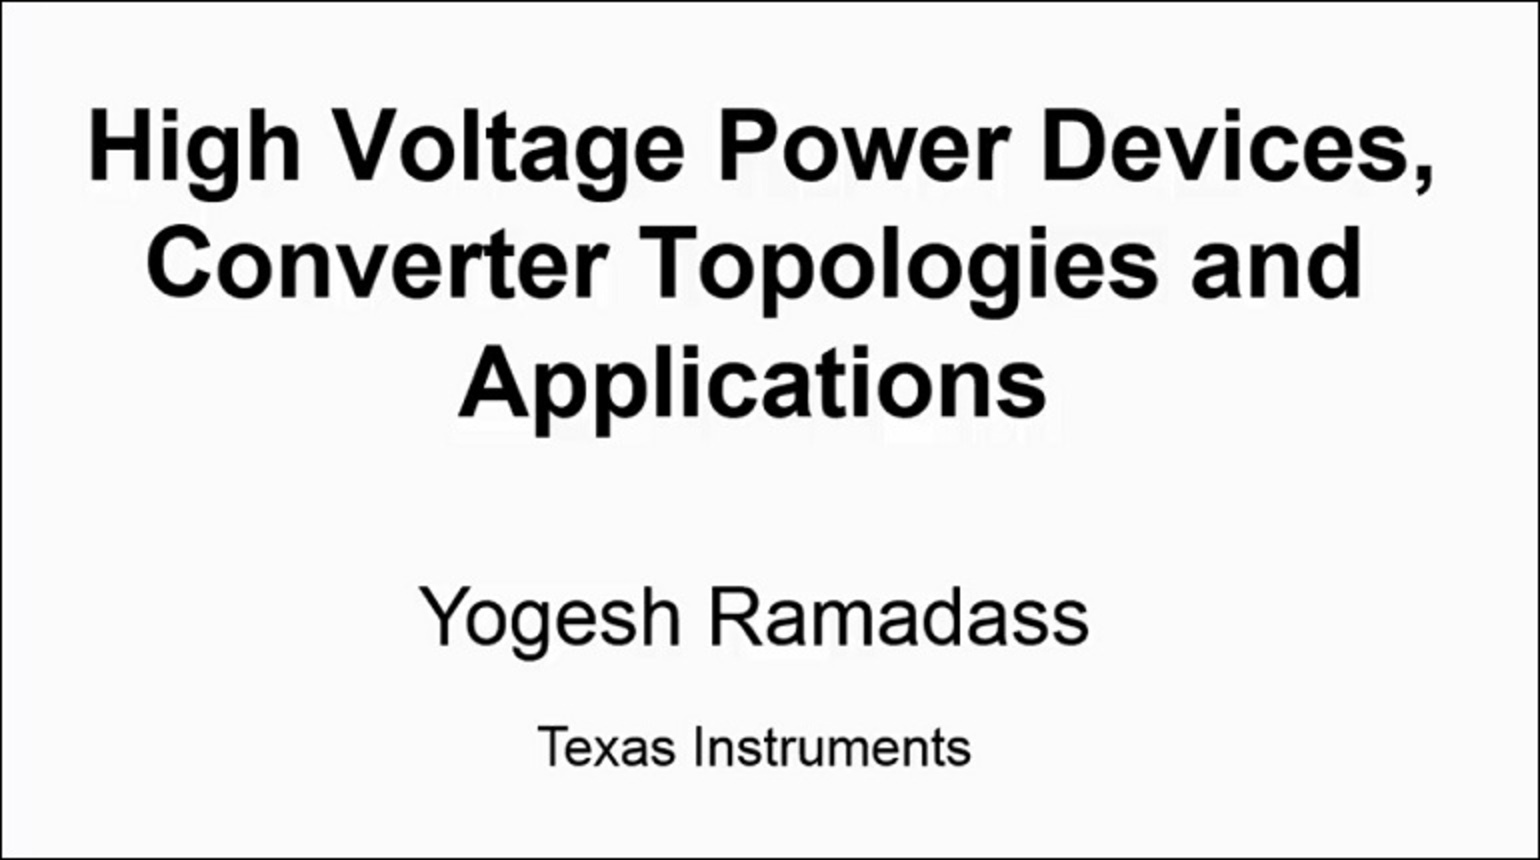 High Voltage Power Devices, Converter Topologies and Applications Video